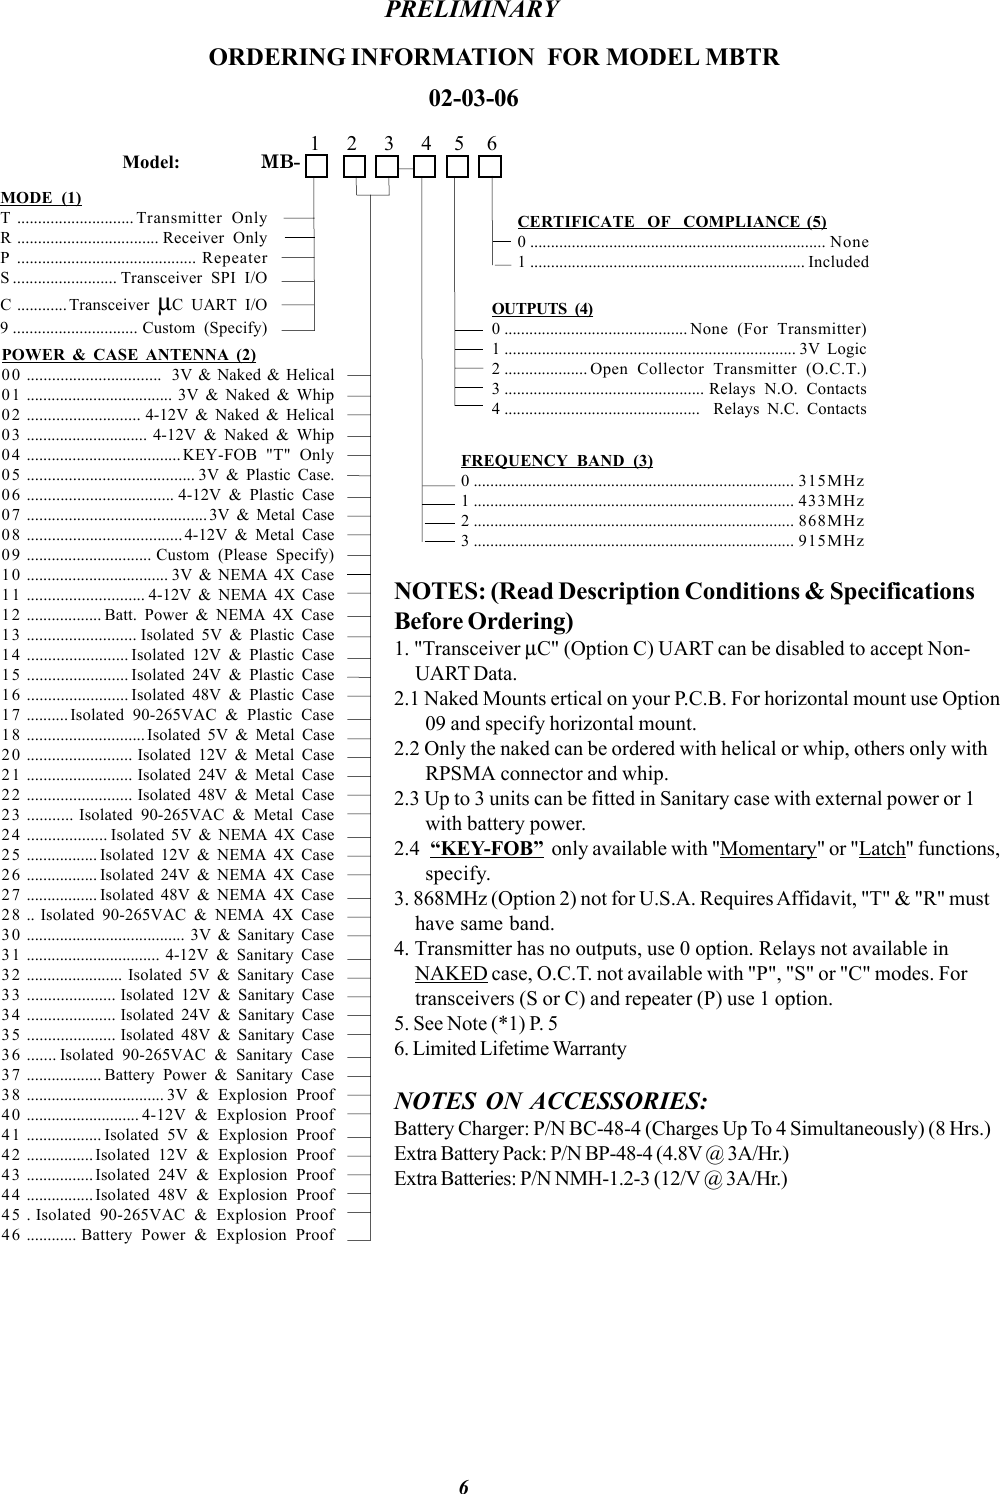    ORDERING INFORMATION  FOR MODEL MBTR02-03-06Model:                     MB-CERTIFICATE  OF  COMPLIANCE (5)0 ....................................................................... None1 .................................................................. IncludedOUTPUTS (4)0 ............................................ None (For Transmitter)1 ...................................................................... 3V  Logic2 .................... Open Collector Transmitter (O.C.T.)3 ................................................ Relays N.O. Contacts4 ...............................................   Relays N.C. ContactsFREQUENCY BAND (3)0 ............................................................................. 315MHz1 ............................................................................. 433MHz2 ............................................................................. 868MHz3 ............................................................................. 915MHzMODE (1)T ............................ Transmitter OnlyR .................................. Receiver OnlyP ........................................... RepeaterS ......................... Transceiver SPI I/OC ............ Transceiver  µC UART I/O9 .............................. Custom (Specify)POWER &amp; CASE ANTENNA (2)0 0 ................................  3V &amp; Naked &amp; Helical0 1 ................................... 3V &amp; Naked &amp; Whip0 2 ........................... 4-12V &amp; Naked &amp; Helical0 3 ............................. 4-12V &amp; Naked &amp; Whip0 4 ..................................... KEY-FOB &quot;T&quot; Only0 5 ........................................ 3V &amp; Plastic Case.0 6 ................................... 4-12V &amp; Plastic Case0 7 ...........................................3V &amp; Metal Case0 8 ..................................... 4-12V &amp; Metal Case0 9 .............................. Custom (Please Specify)1 0 .................................. 3V &amp; NEMA 4X Case1 1 ............................ 4-12V &amp; NEMA 4X Case1 2 .................. Batt. Power &amp; NEMA 4X Case1 3 .......................... Isolated 5V &amp; Plastic Case1 4 ........................ Isolated 12V &amp; Plastic Case1 5 ........................ Isolated 24V &amp; Plastic Case1 6 ........................ Isolated 48V &amp; Plastic Case1 7 .......... Isolated 90-265VAC &amp; Plastic Case1 8 ............................ Isolated 5V &amp; Metal Case2 0 ......................... Isolated 12V &amp; Metal Case2 1 ......................... Isolated 24V &amp; Metal Case2 2 ......................... Isolated 48V &amp; Metal Case2 3 ........... Isolated 90-265VAC &amp; Metal Case2 4 ................... Isolated 5V &amp; NEMA 4X Case2 5 ................. Isolated 12V &amp; NEMA 4X Case2 6 ................. Isolated 24V &amp; NEMA 4X Case2 7 ................. Isolated 48V &amp; NEMA 4X Case2 8 .. Isolated 90-265VAC &amp; NEMA 4X Case3 0 ...................................... 3V &amp; Sanitary Case3 1 ................................ 4-12V &amp; Sanitary Case3 2 ....................... Isolated 5V &amp; Sanitary Case3 3 ..................... Isolated 12V &amp; Sanitary Case3 4 ..................... Isolated 24V &amp; Sanitary Case3 5 ..................... Isolated 48V &amp; Sanitary Case3 6 ....... Isolated 90-265VAC &amp; Sanitary Case3 7 .................. Battery Power &amp; Sanitary Case3 8 ................................. 3V &amp; Explosion Proof4 0 ........................... 4-12V &amp; Explosion Proof4 1 .................. Isolated 5V &amp; Explosion Proof4 2 ................ Isolated 12V &amp; Explosion Proof4 3 ................ Isolated 24V &amp; Explosion Proof4 4 ................ Isolated 48V &amp; Explosion Proof45 . Isolated 90-265VAC &amp; Explosion Proof4 6 ............ Battery Power &amp; Explosion ProofNOTES: (Read Description Conditions &amp; SpecificationsBefore Ordering)1. &quot;Transceiver µC&quot; (Option C) UART can be disabled to accept Non-UART Data.2.1 Naked Mounts ertical on your P.C.B. For horizontal mount use Option09 and specify horizontal mount.2.2 Only the naked can be ordered with helical or whip, others only withRPSMA connector and whip.2.3 Up to 3 units can be fitted in Sanitary case with external power or 1with battery power.2.4 “KEY-FOB”  only available with &quot;Momentary&quot; or &quot;Latch&quot; functions,specify.3. 868MHz (Option 2) not for U.S.A. Requires Affidavit, &quot;T&quot; &amp; &quot;R&quot; musthave same band.4. Transmitter has no outputs, use 0 option. Relays not available inNAKED case, O.C.T. not available with &quot;P&quot;, &quot;S&quot; or &quot;C&quot; modes. Fortransceivers (S or C) and repeater (P) use 1 option.5. See Note (*1) P. 56. Limited Lifetime WarrantyNOTES ON ACCESSORIES:Battery Charger: P/N BC-48-4 (Charges Up To 4 Simultaneously) (8 Hrs.)Extra Battery Pack: P/N BP-48-4 (4.8V @ 3A/Hr.)Extra Batteries: P/N NMH-1.2-3 (12/V @ 3A/Hr.)1      2      3      4     5     6PRELIMINARY6